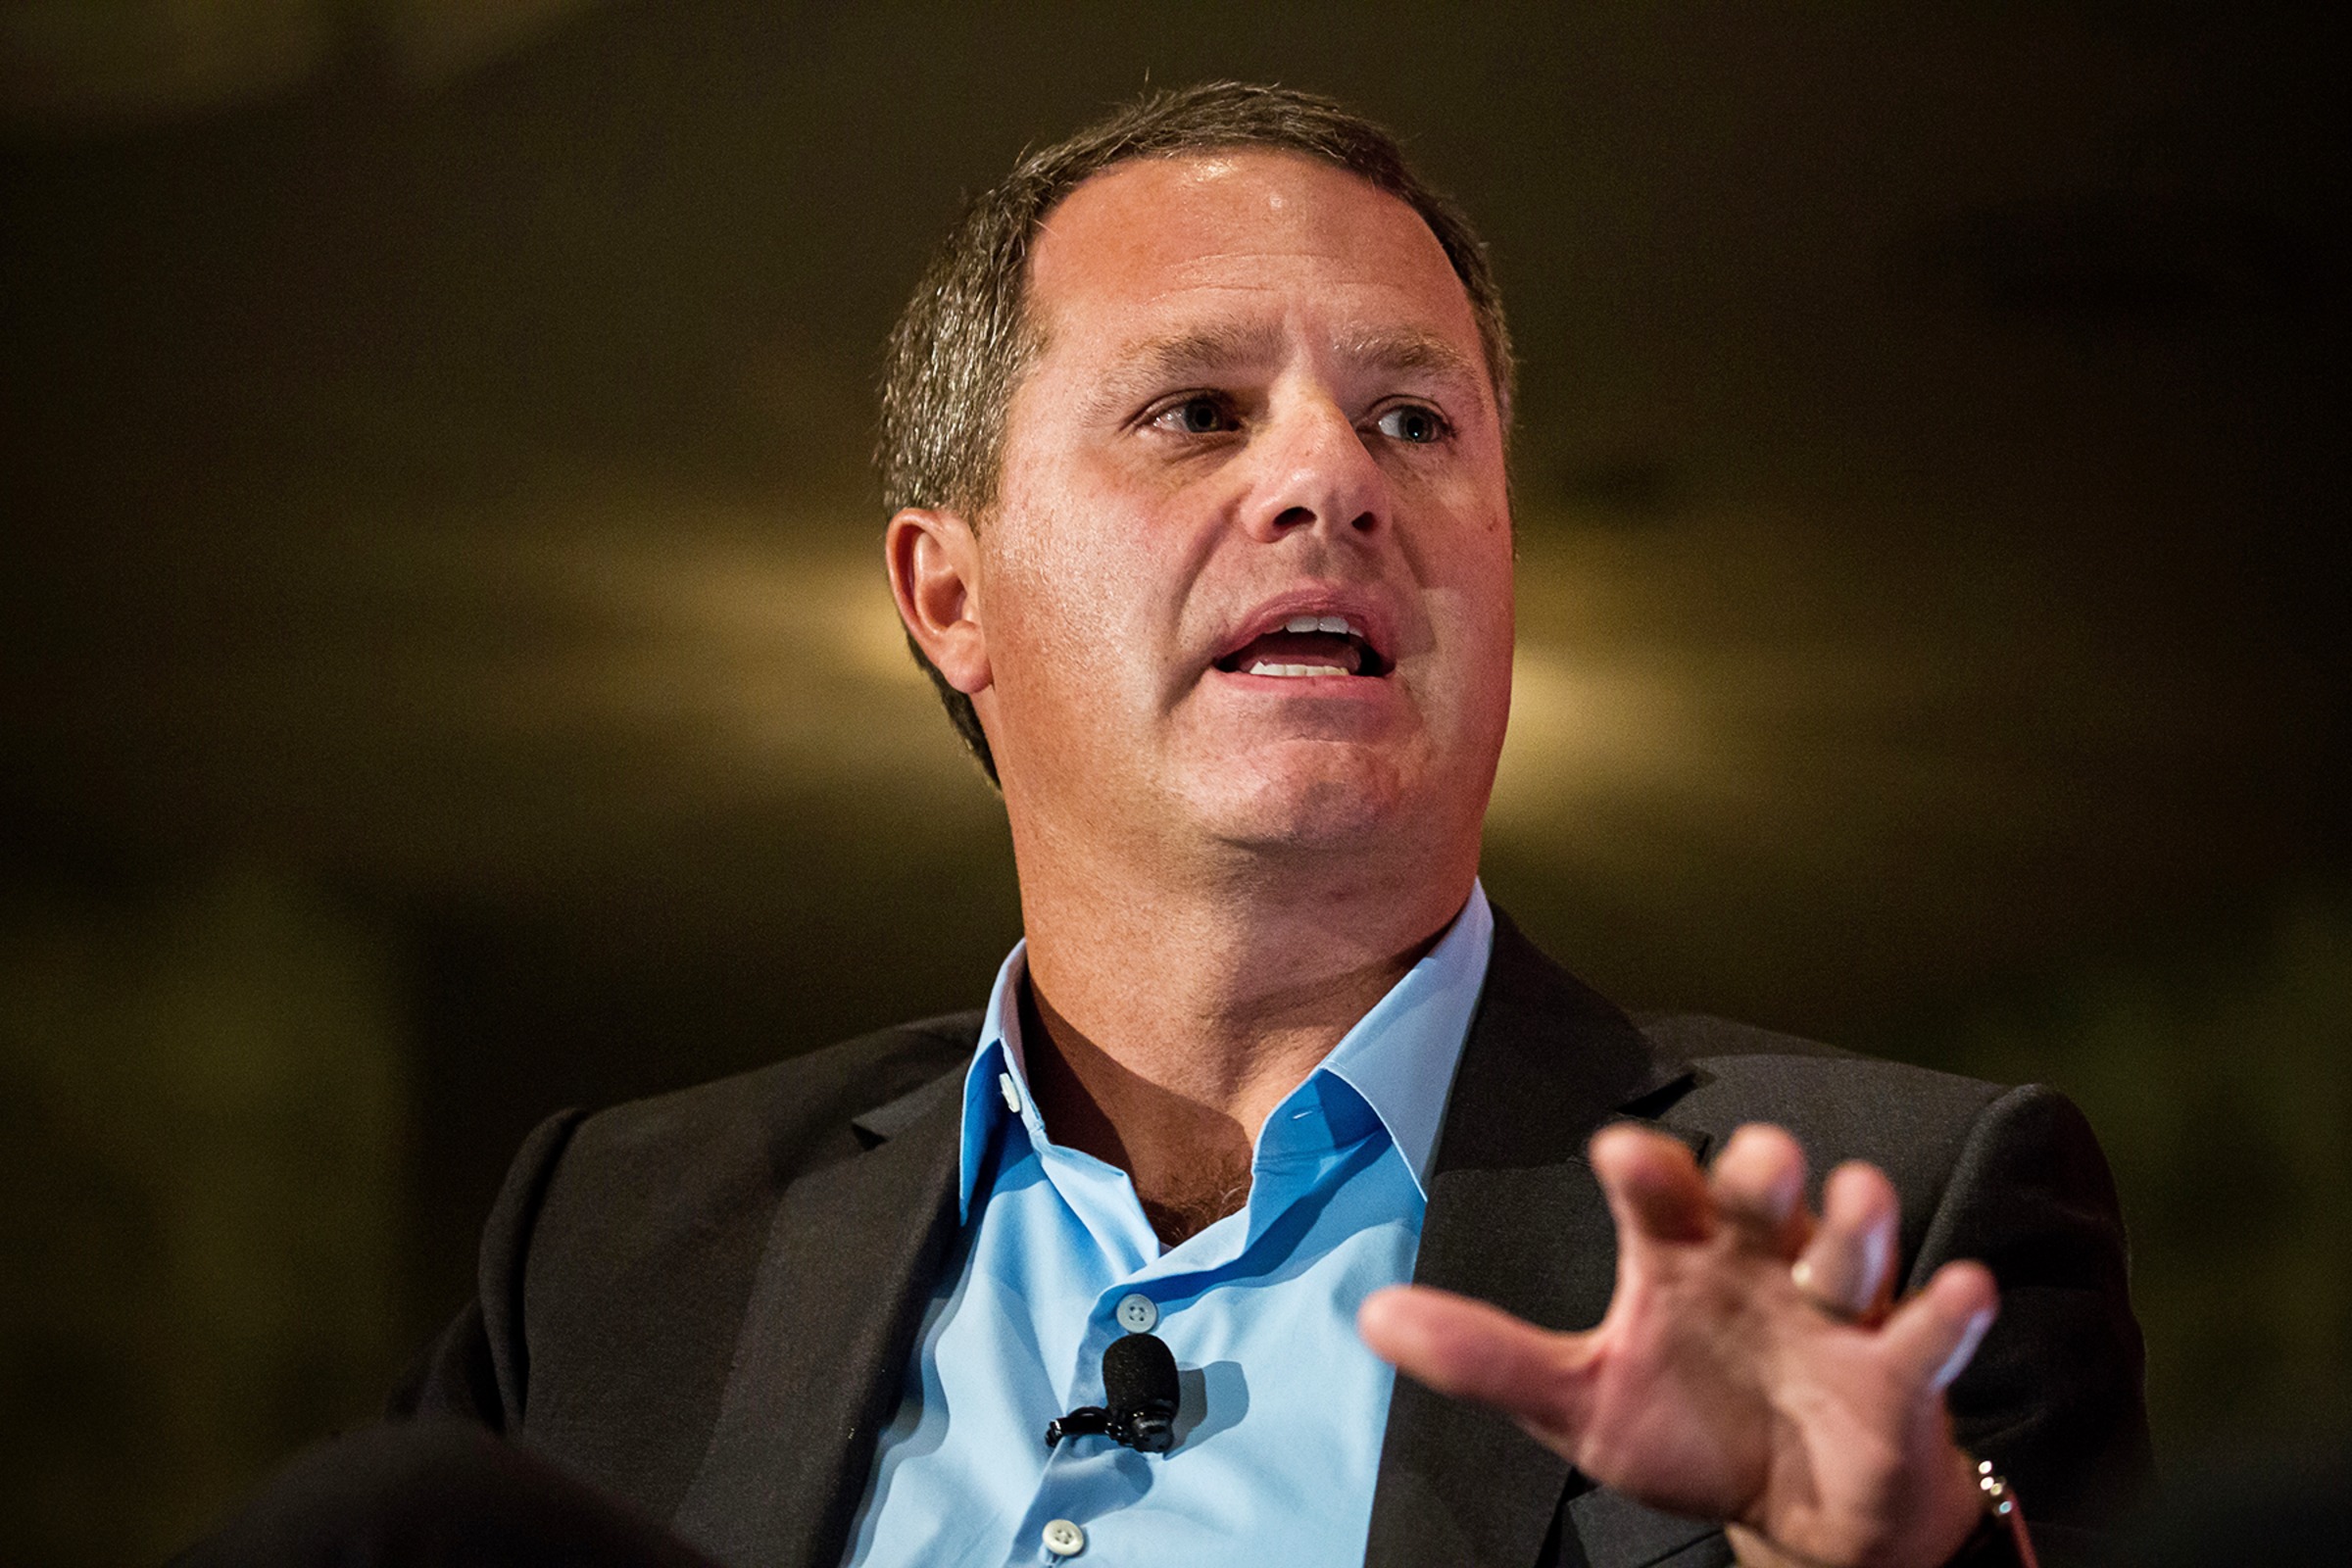 Doug McMillon, the CEO of Walmart. (Michael Nagle—Bloomberg/Getty Images)